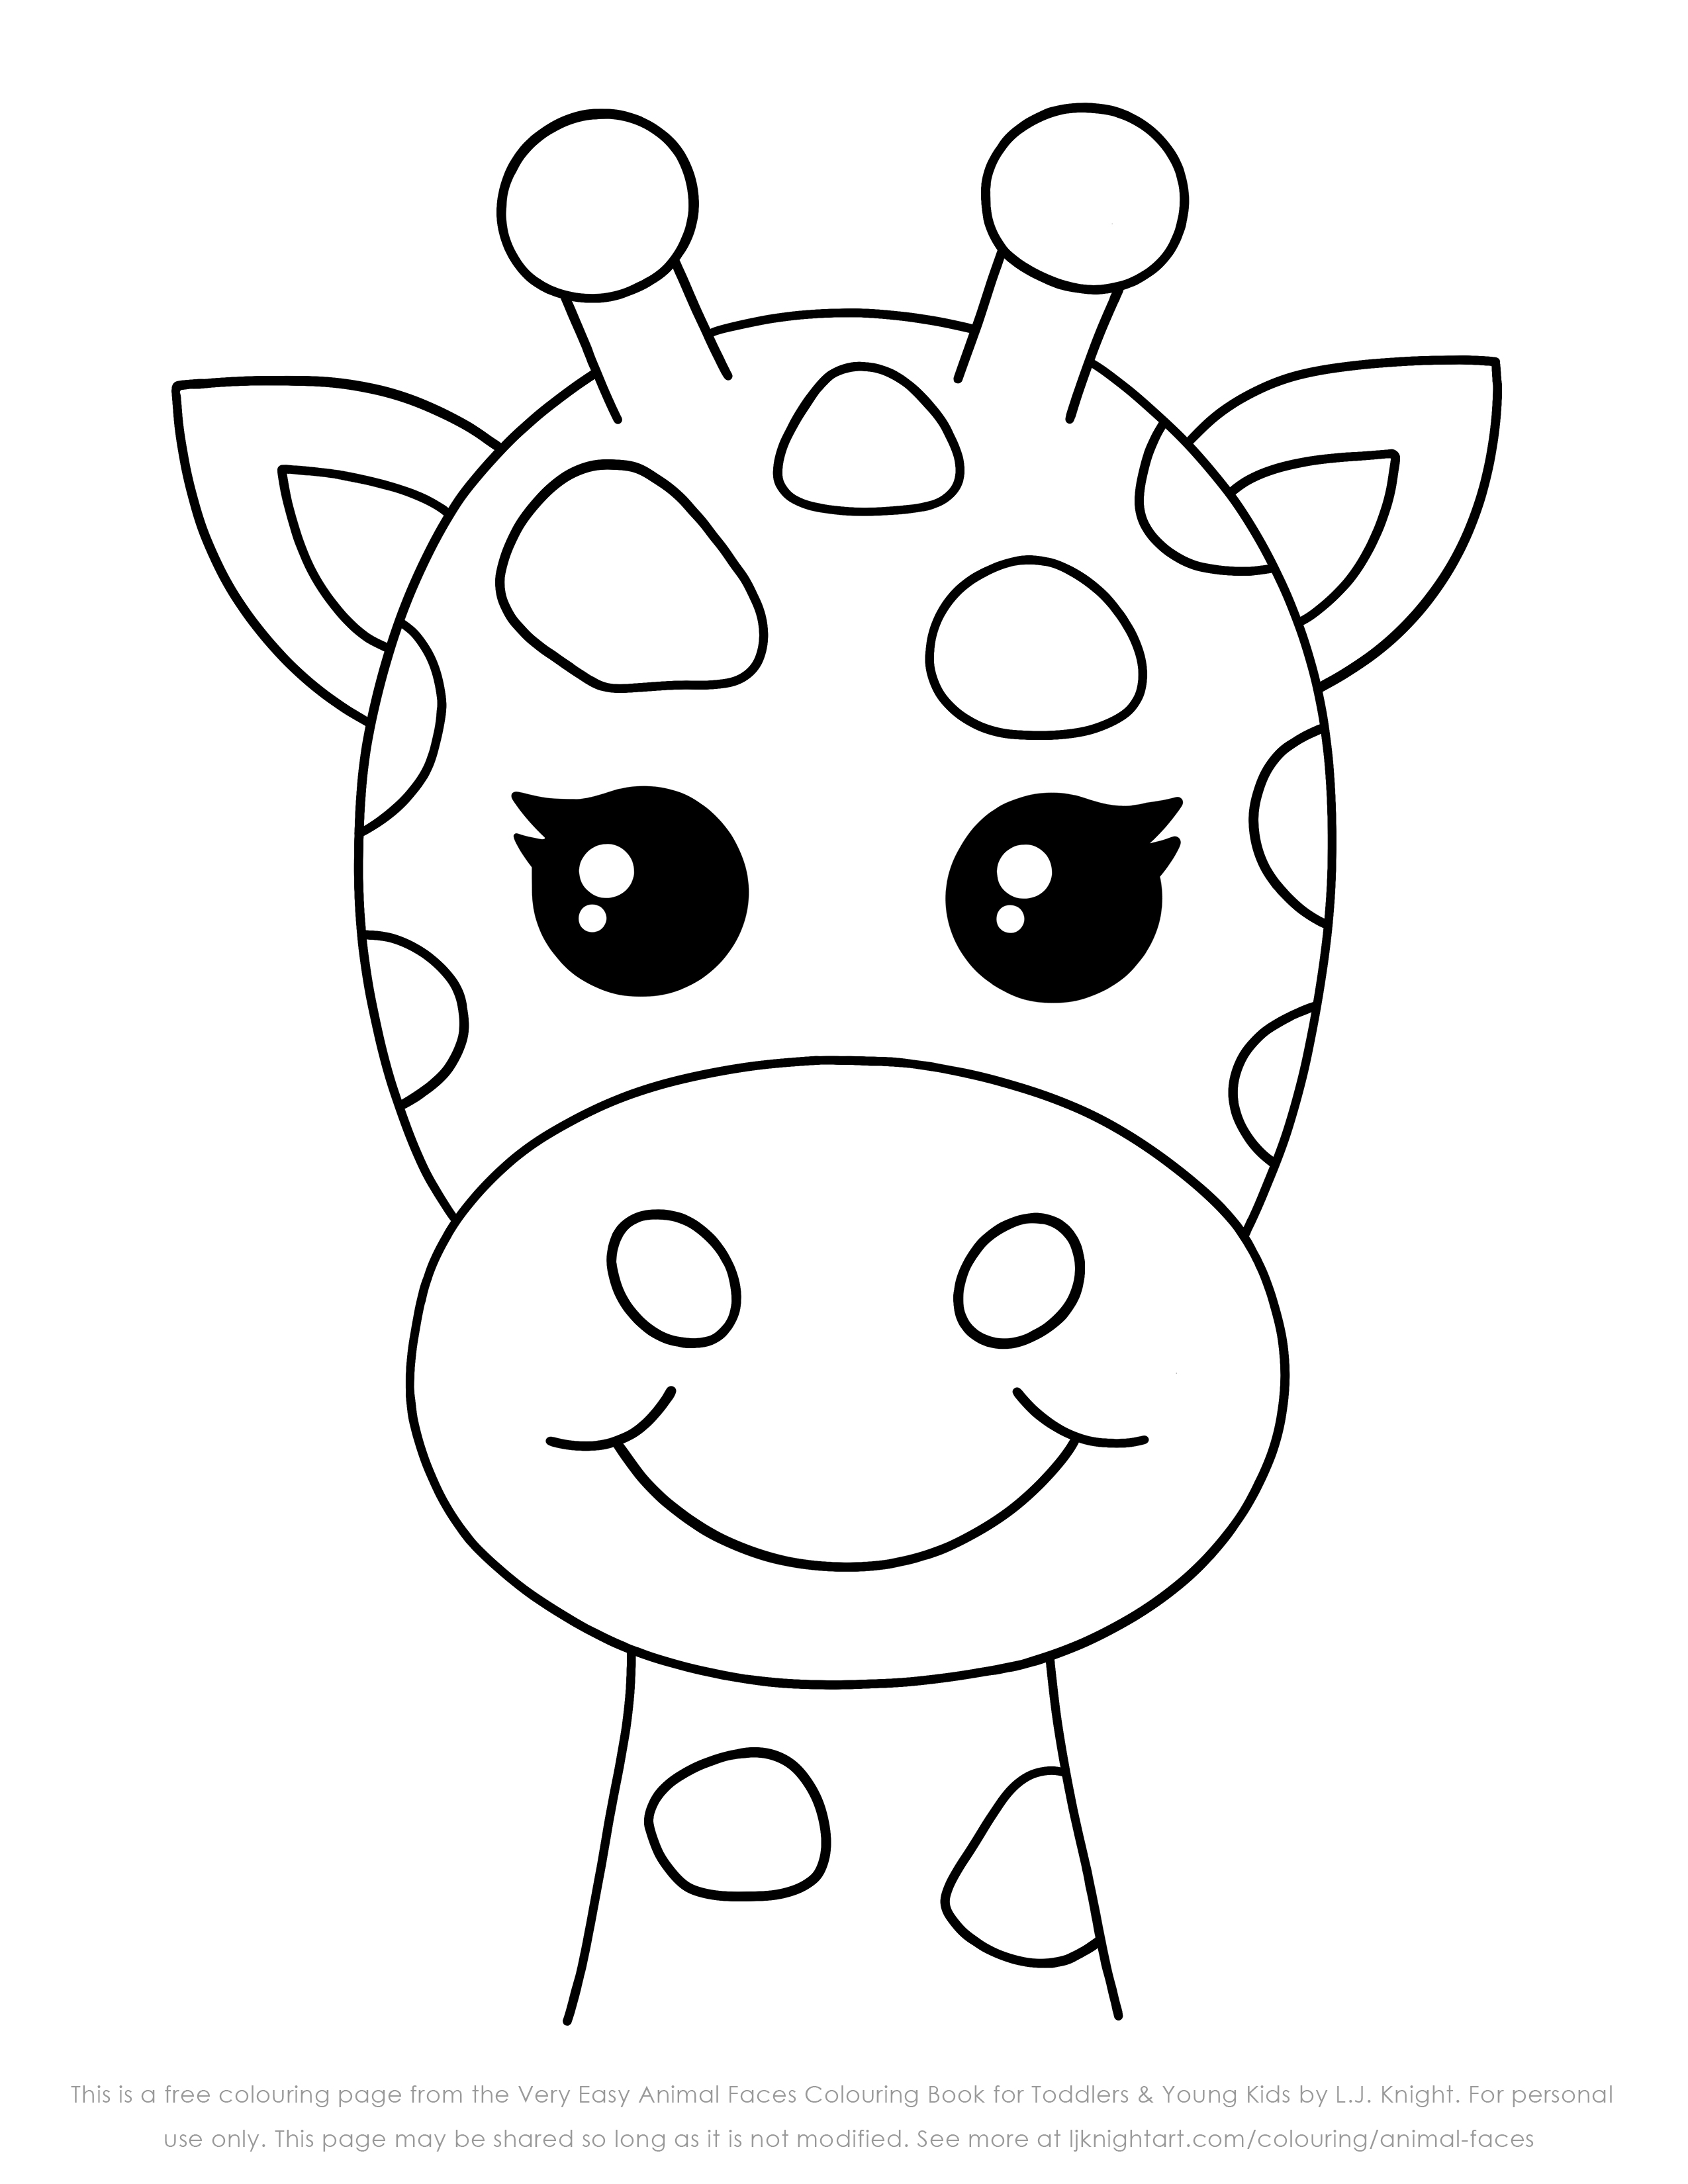 Free Easy Giraffe Colouring Page for Kids . Knight